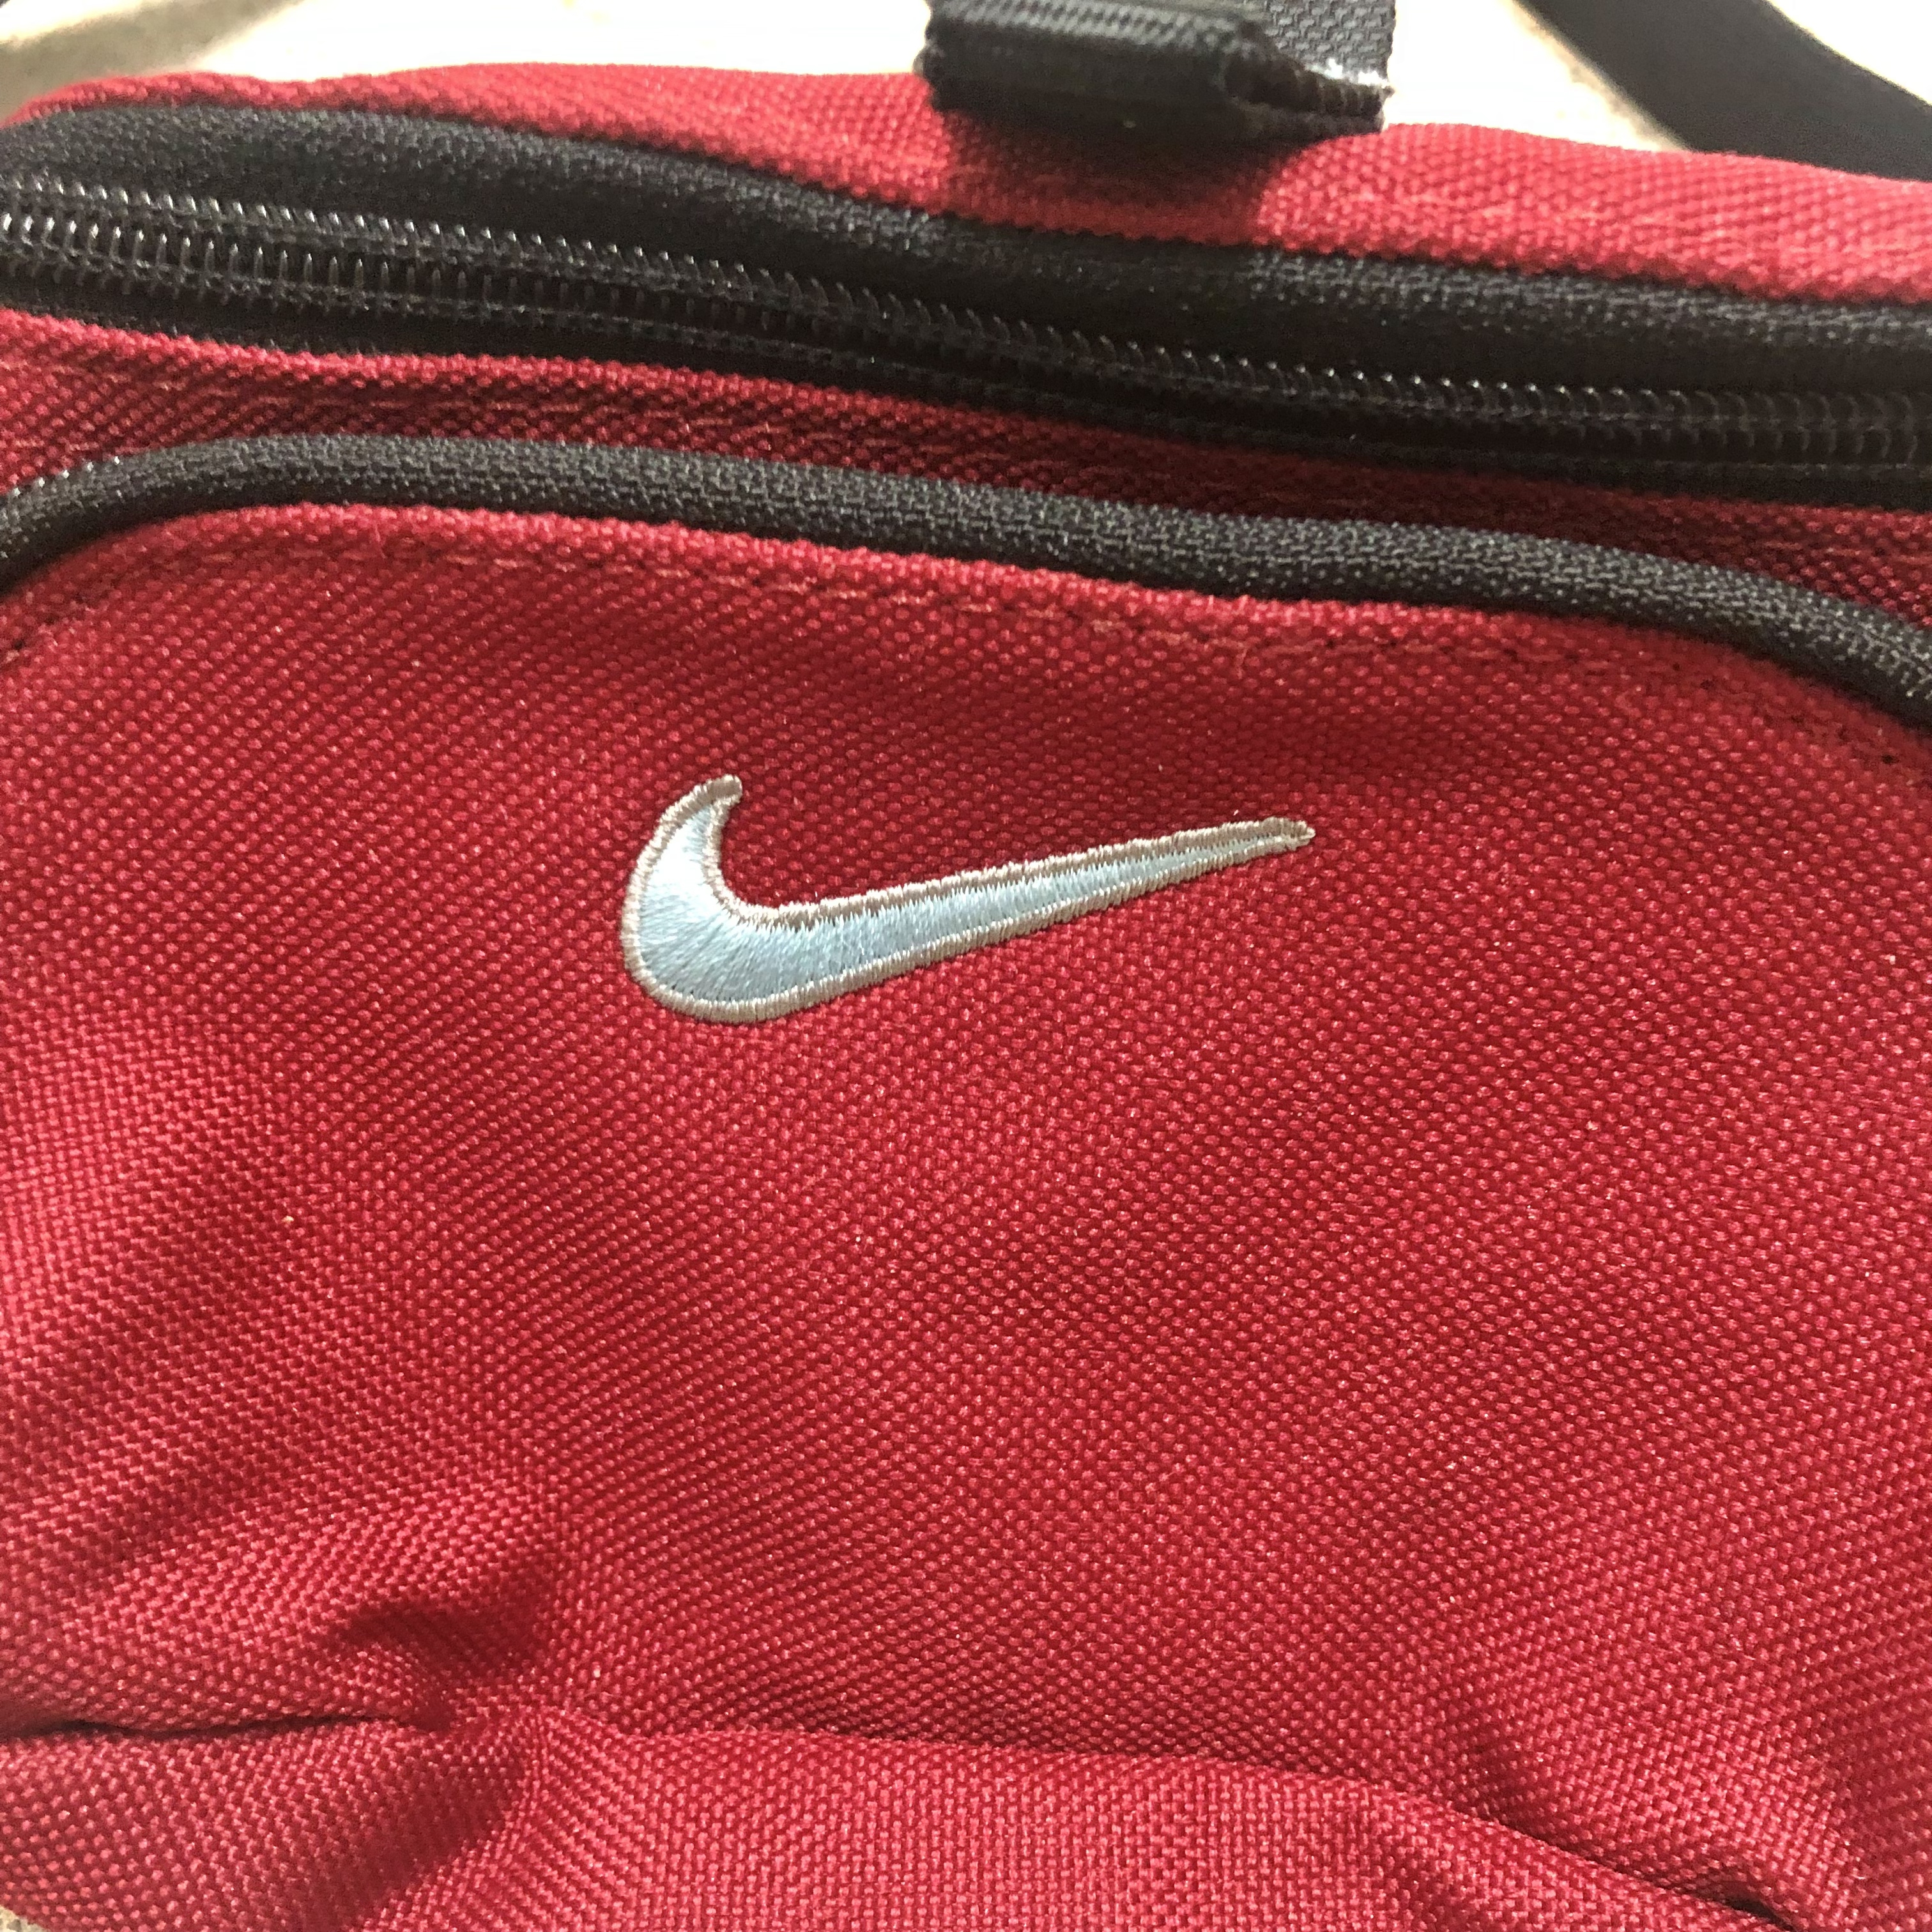 90～00s OLD NIKE/West Bag/Pouch/ウエストバッグ/ポーチ/レッド